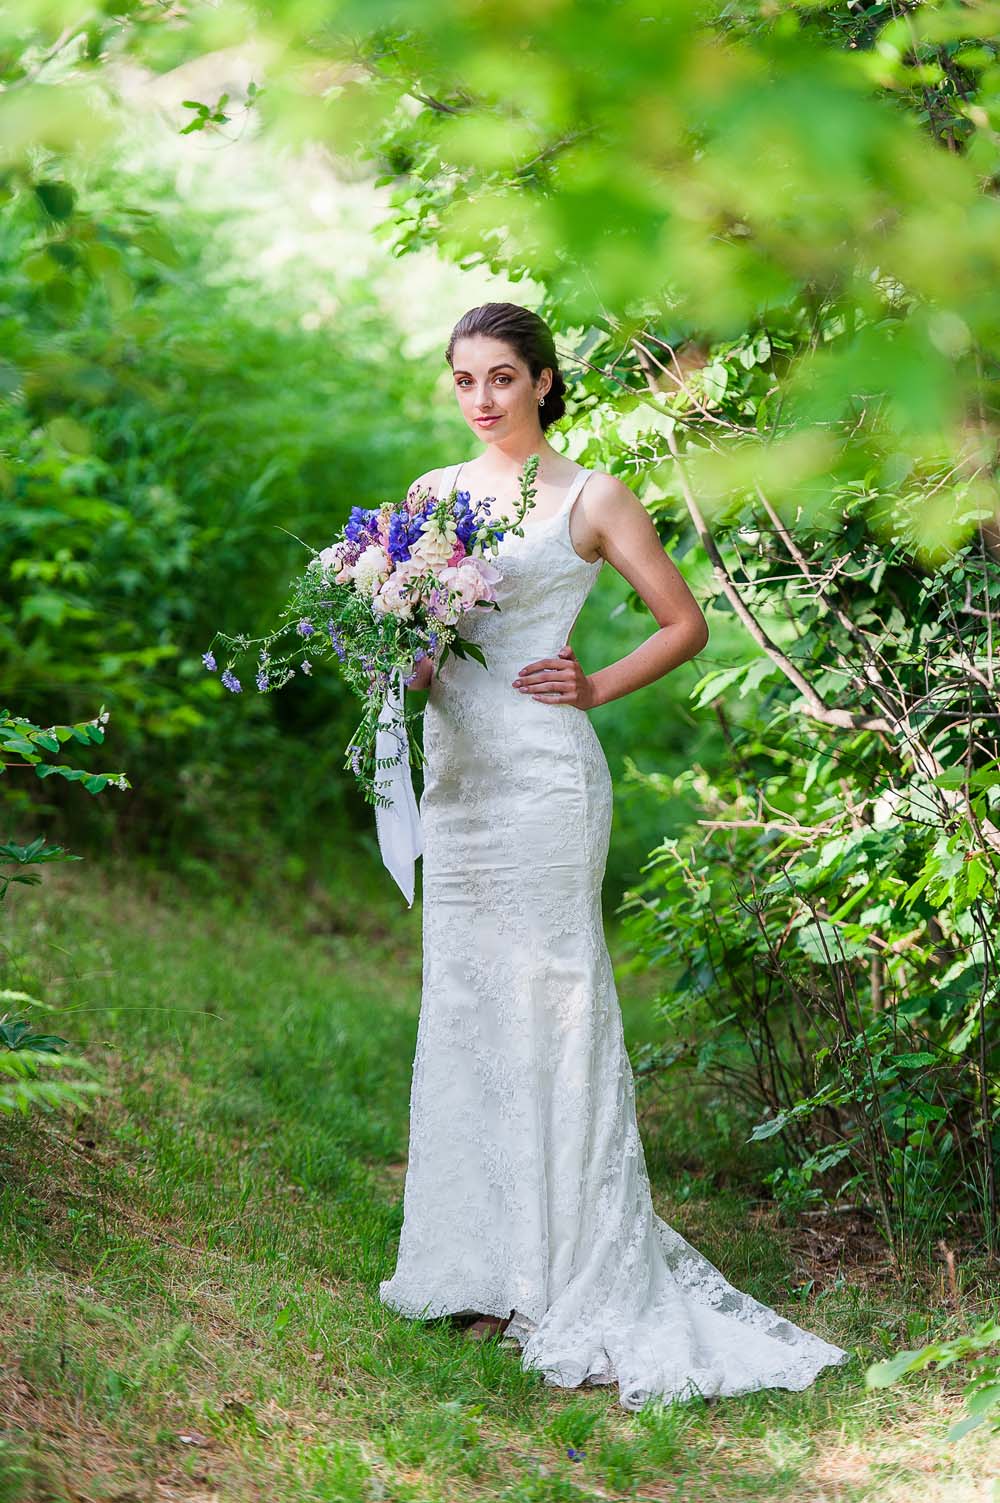 An Ultra Violet-Inspired Styled Shoot In Quebec - Bride